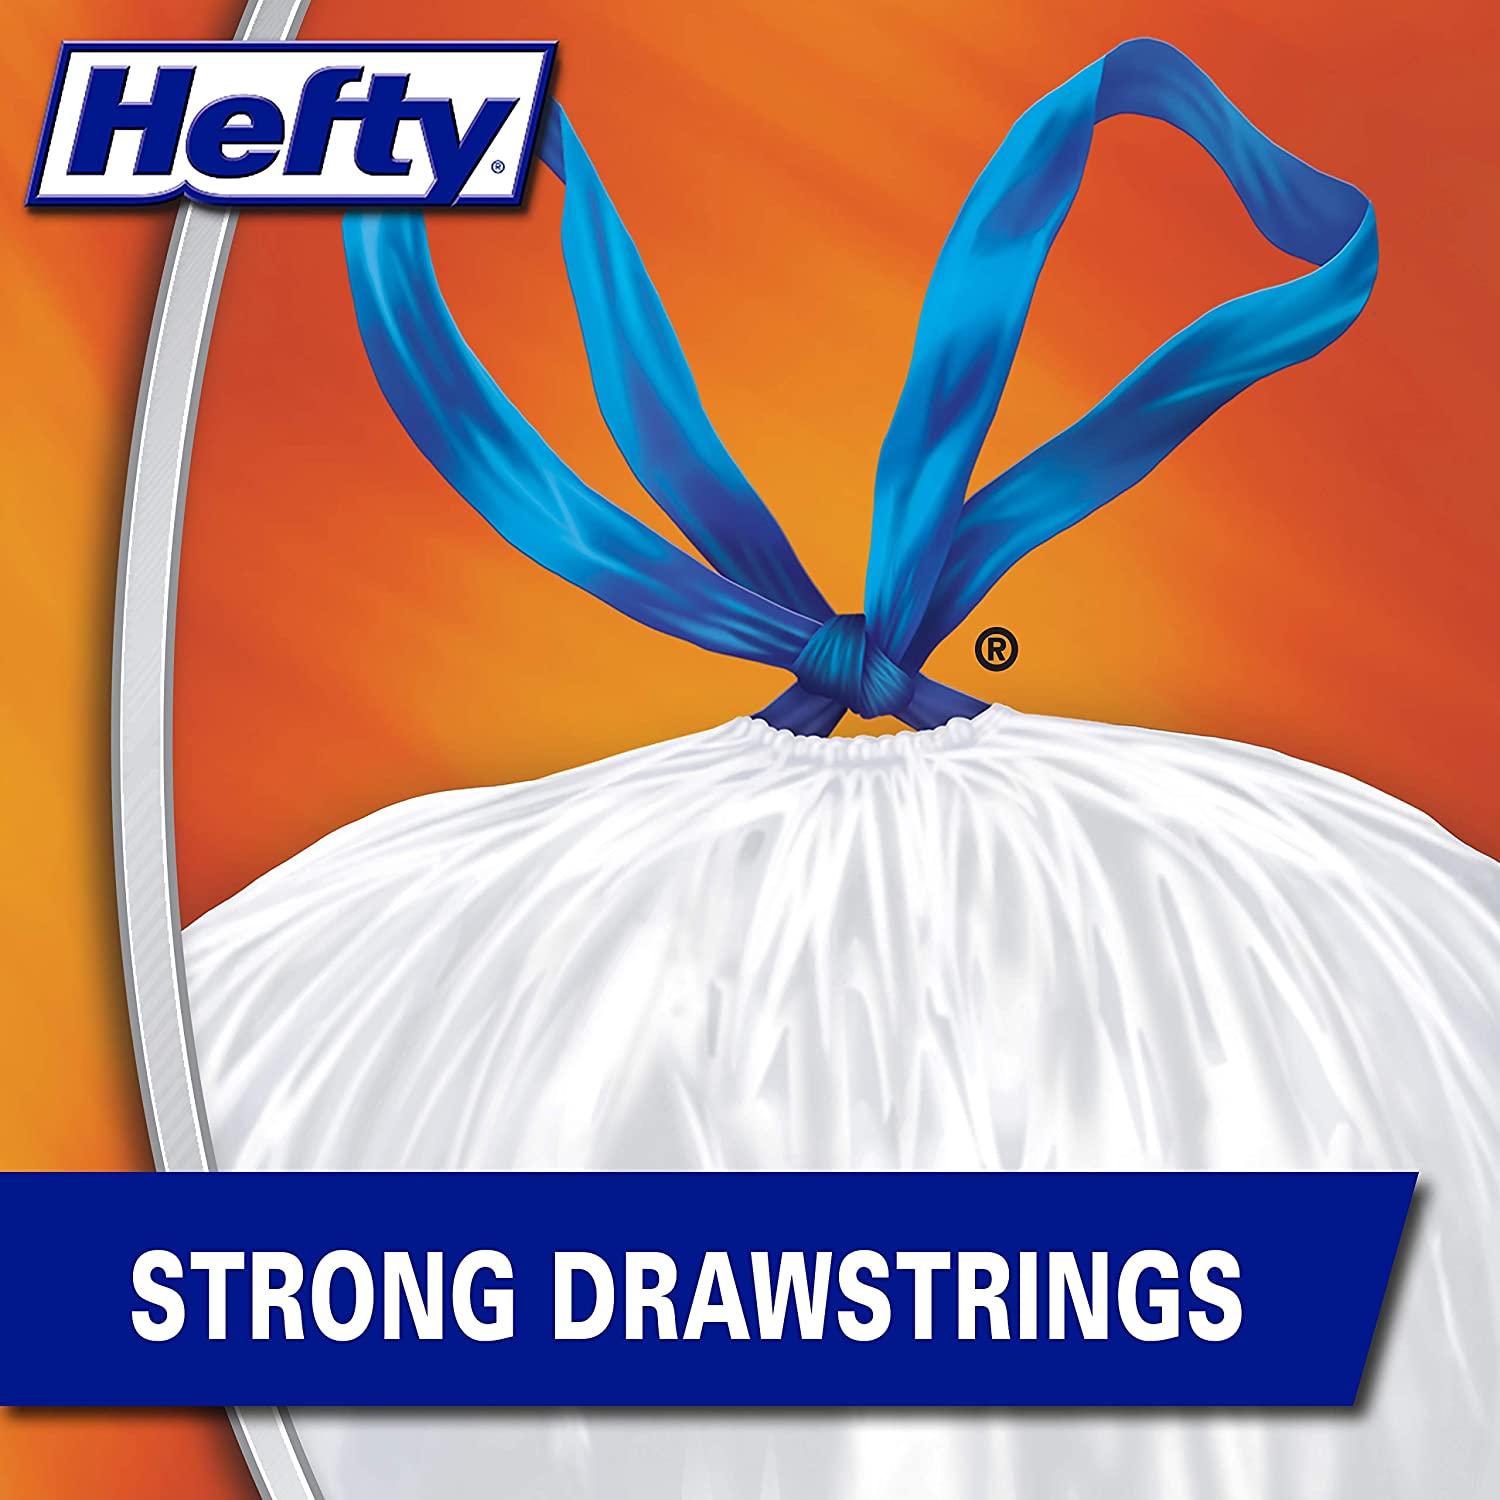  Hefty Strong Tall Kitchen Trash Bags, Unscented, 13